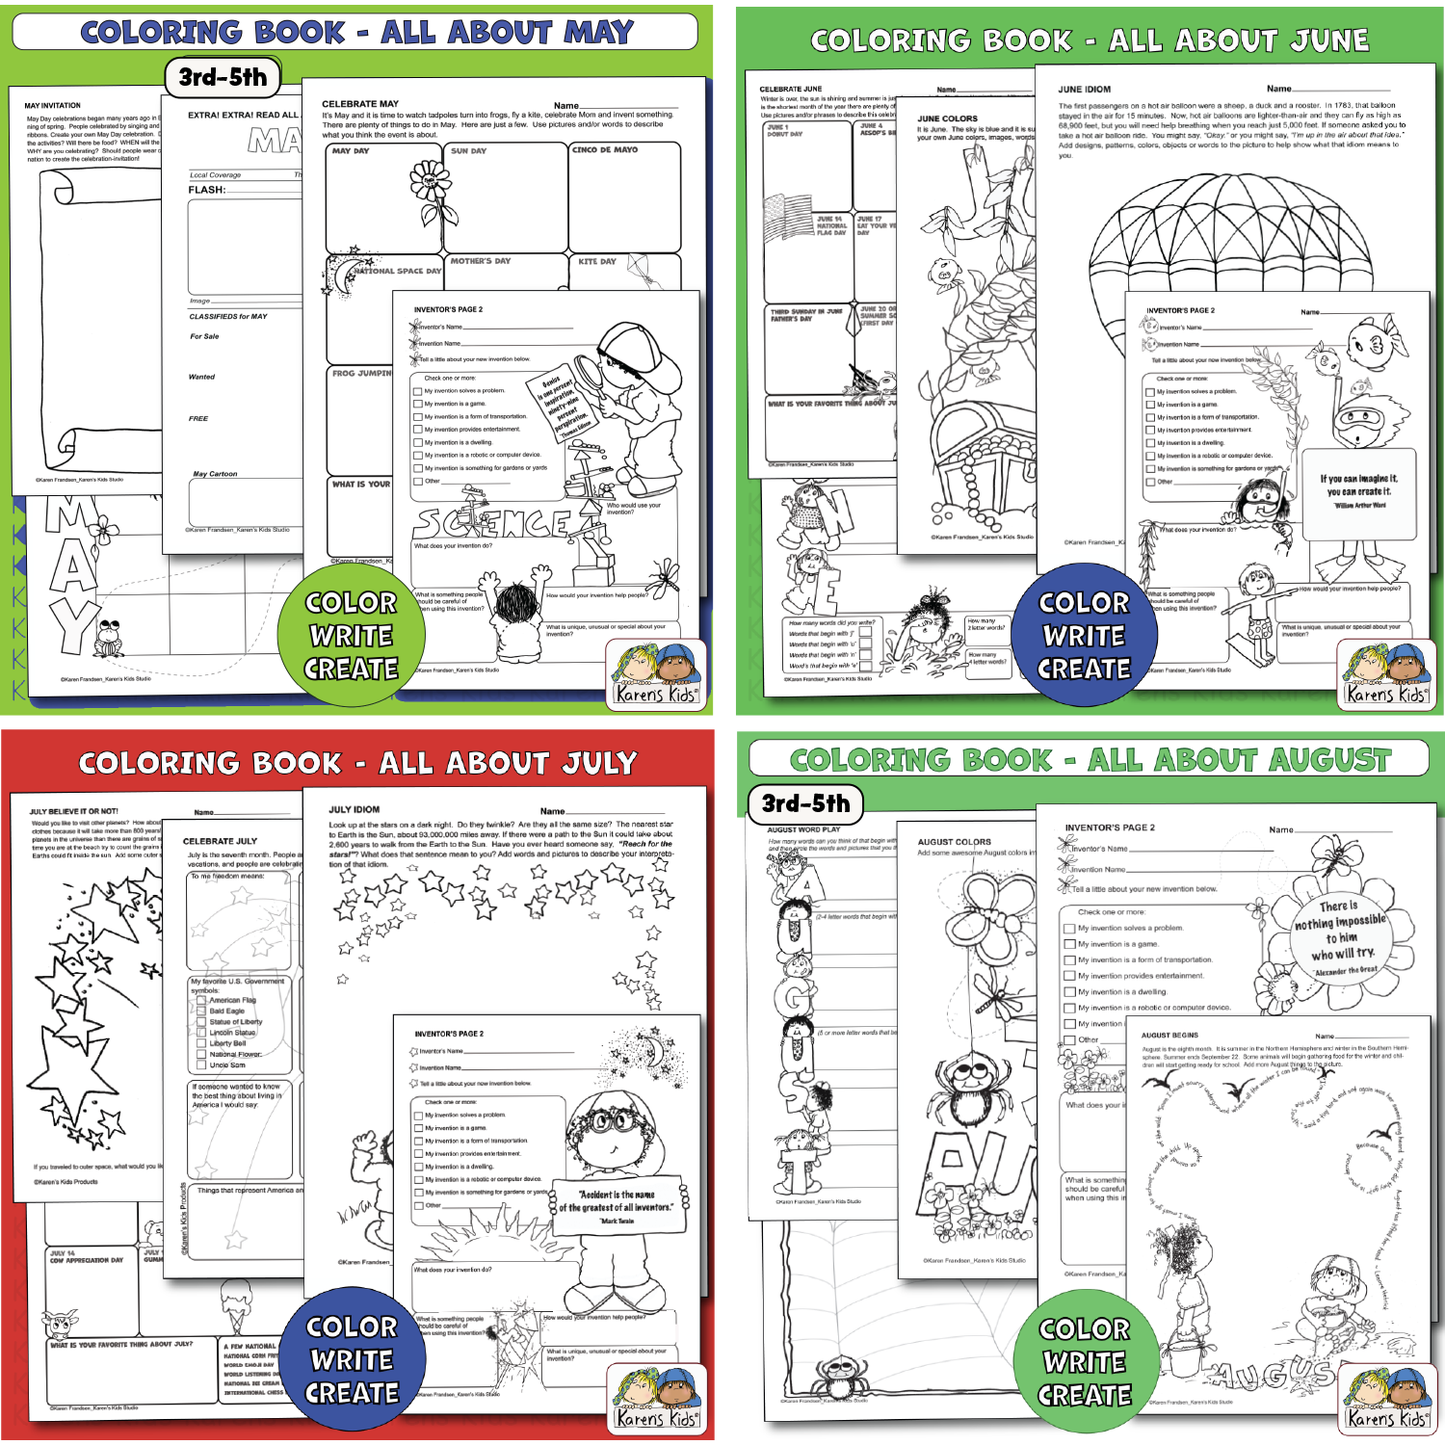 5 back and white sample pages showing worksheets for May. 5 back and white sample pages showing worksheets for June. 5 back and white sample pages  showing worksheets for  July and 5 more for August.